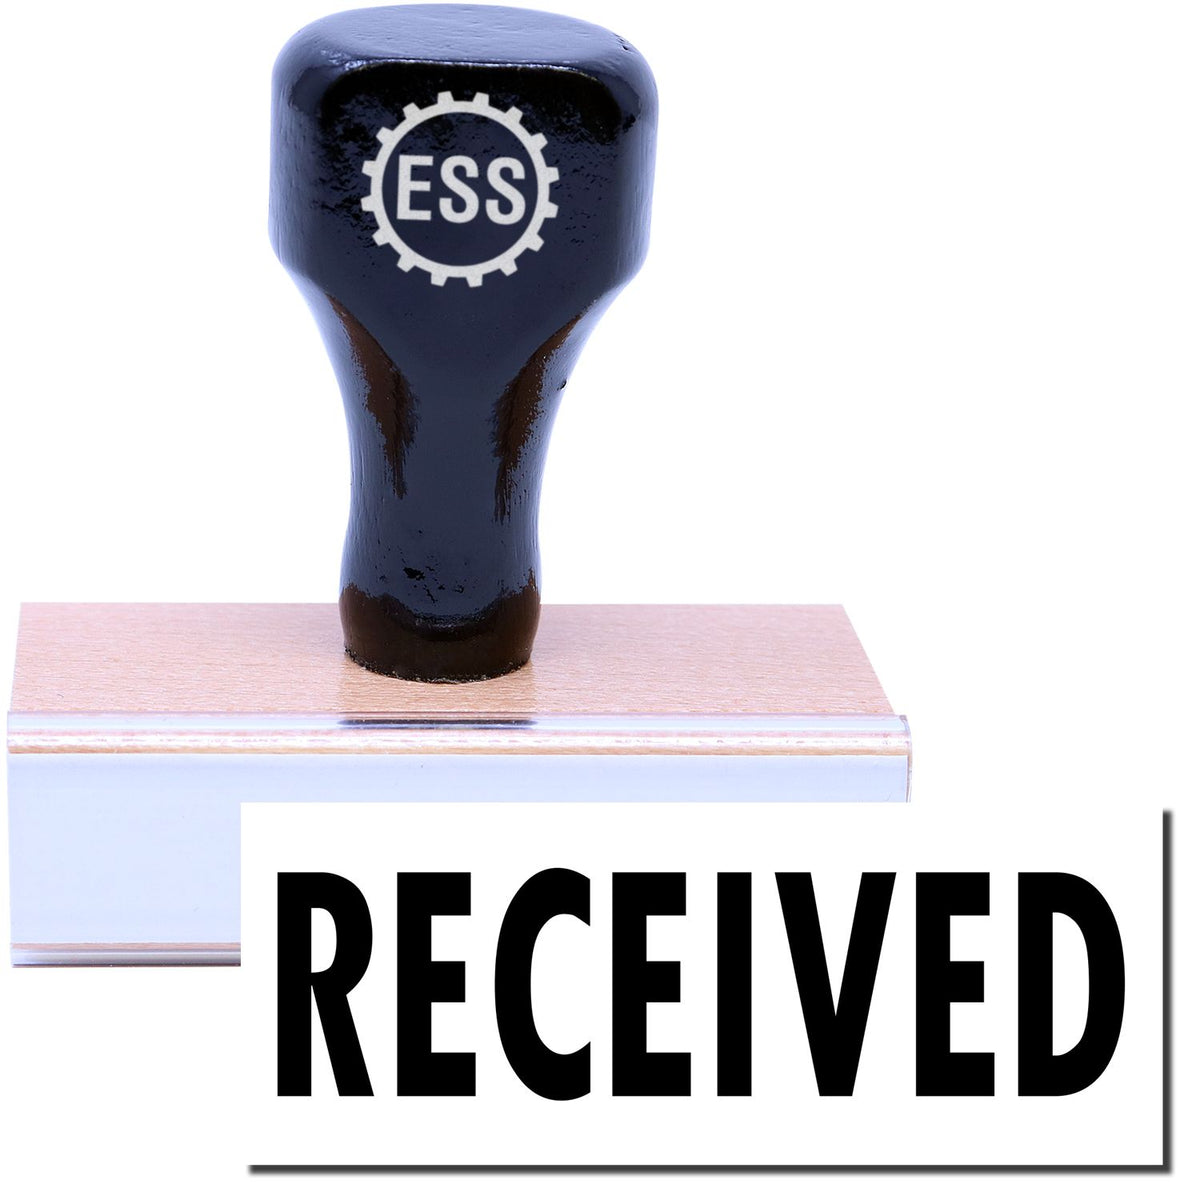 A stock office rubber stamp with a stamped image showing how the text &quot;RECEIVED&quot; is displayed after stamping.